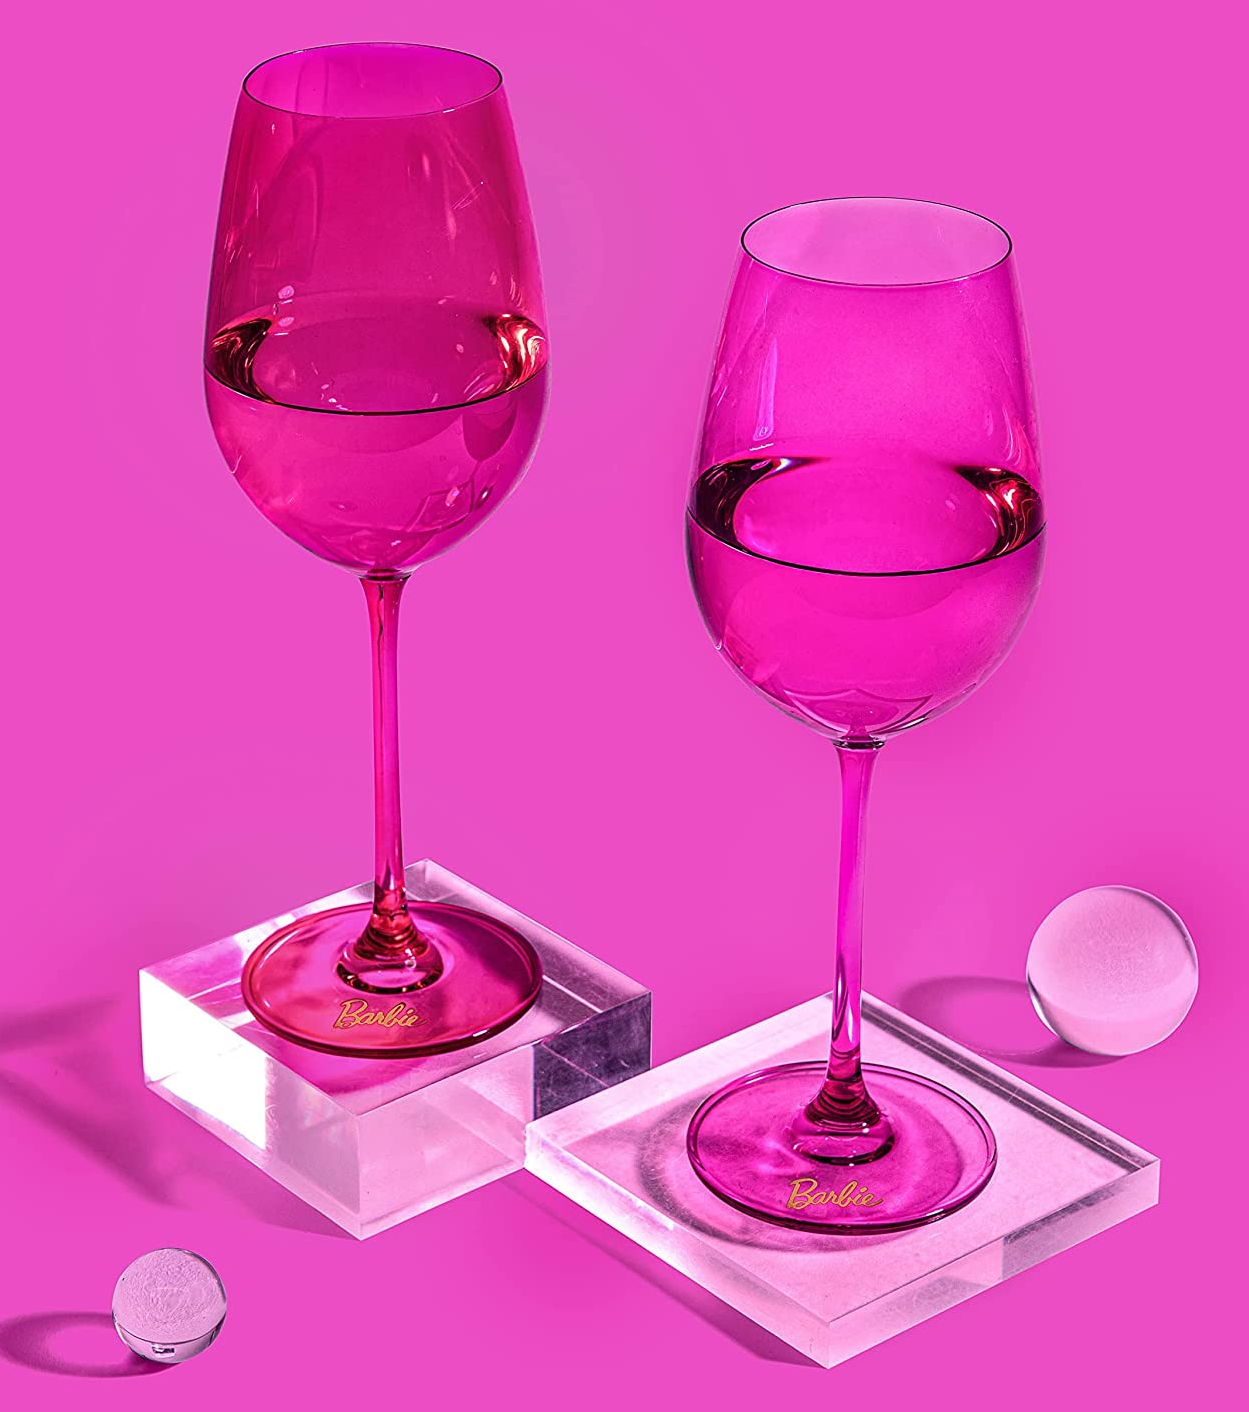 Image of the two pink Barbie glasses